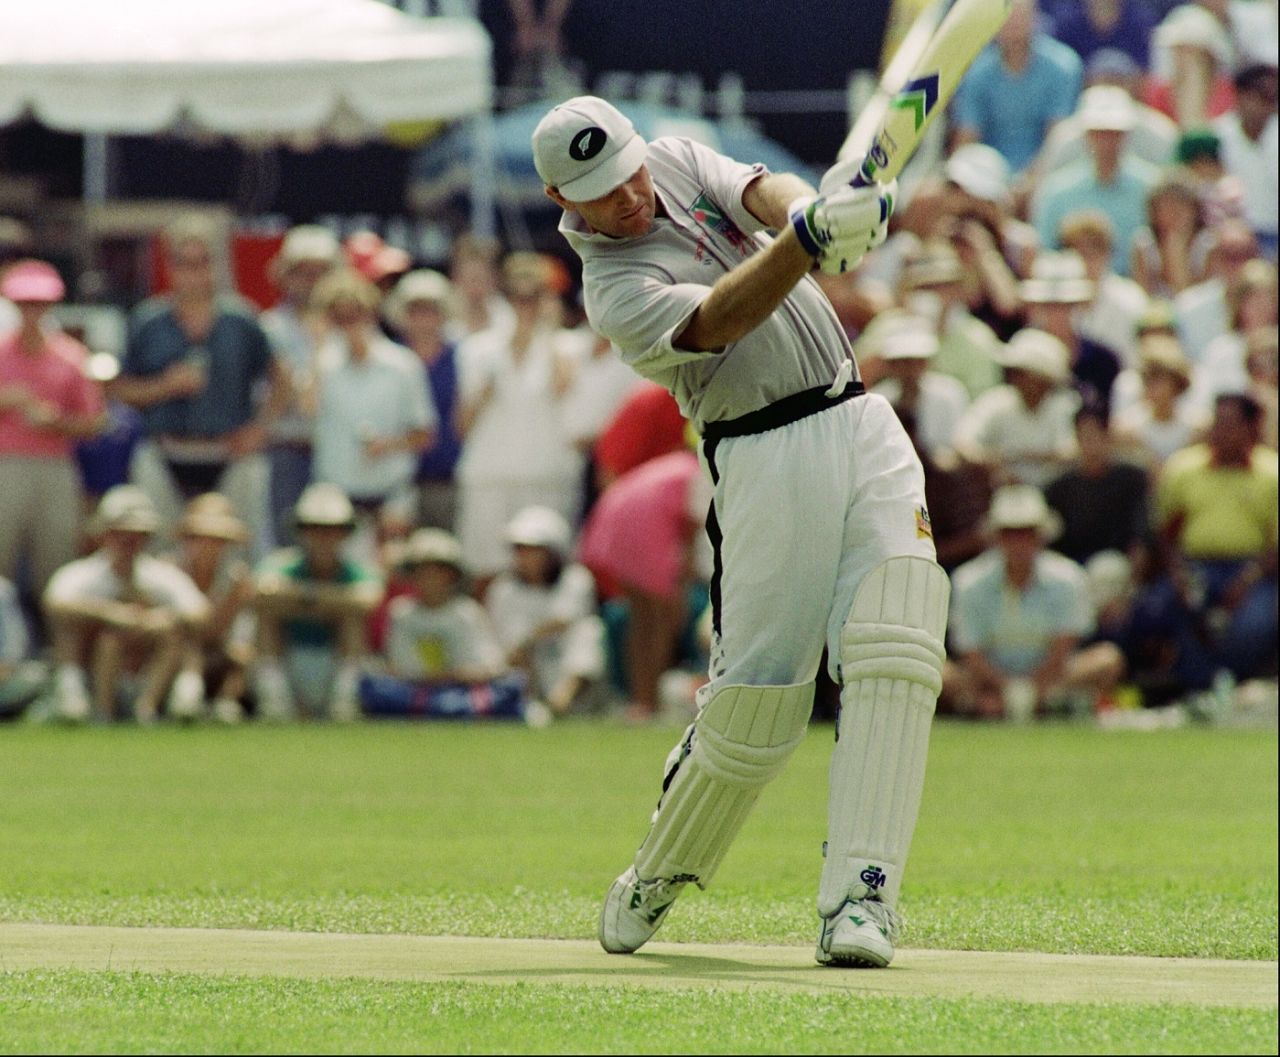 Martin Crowe steps out to whack the ball, October 4, 1992